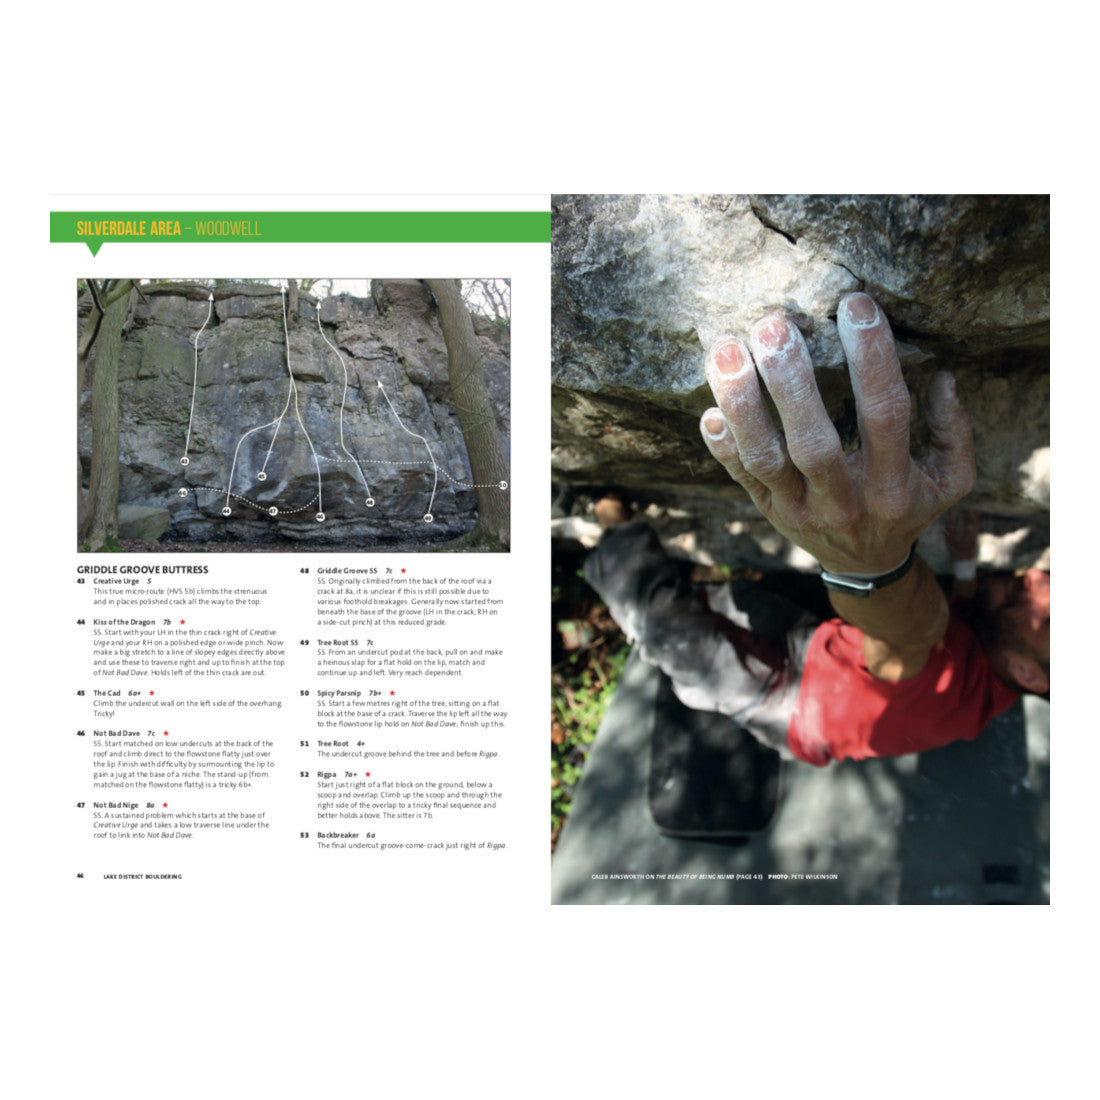 Lake District Bouldering guide, example inside page with photos and route descriptions